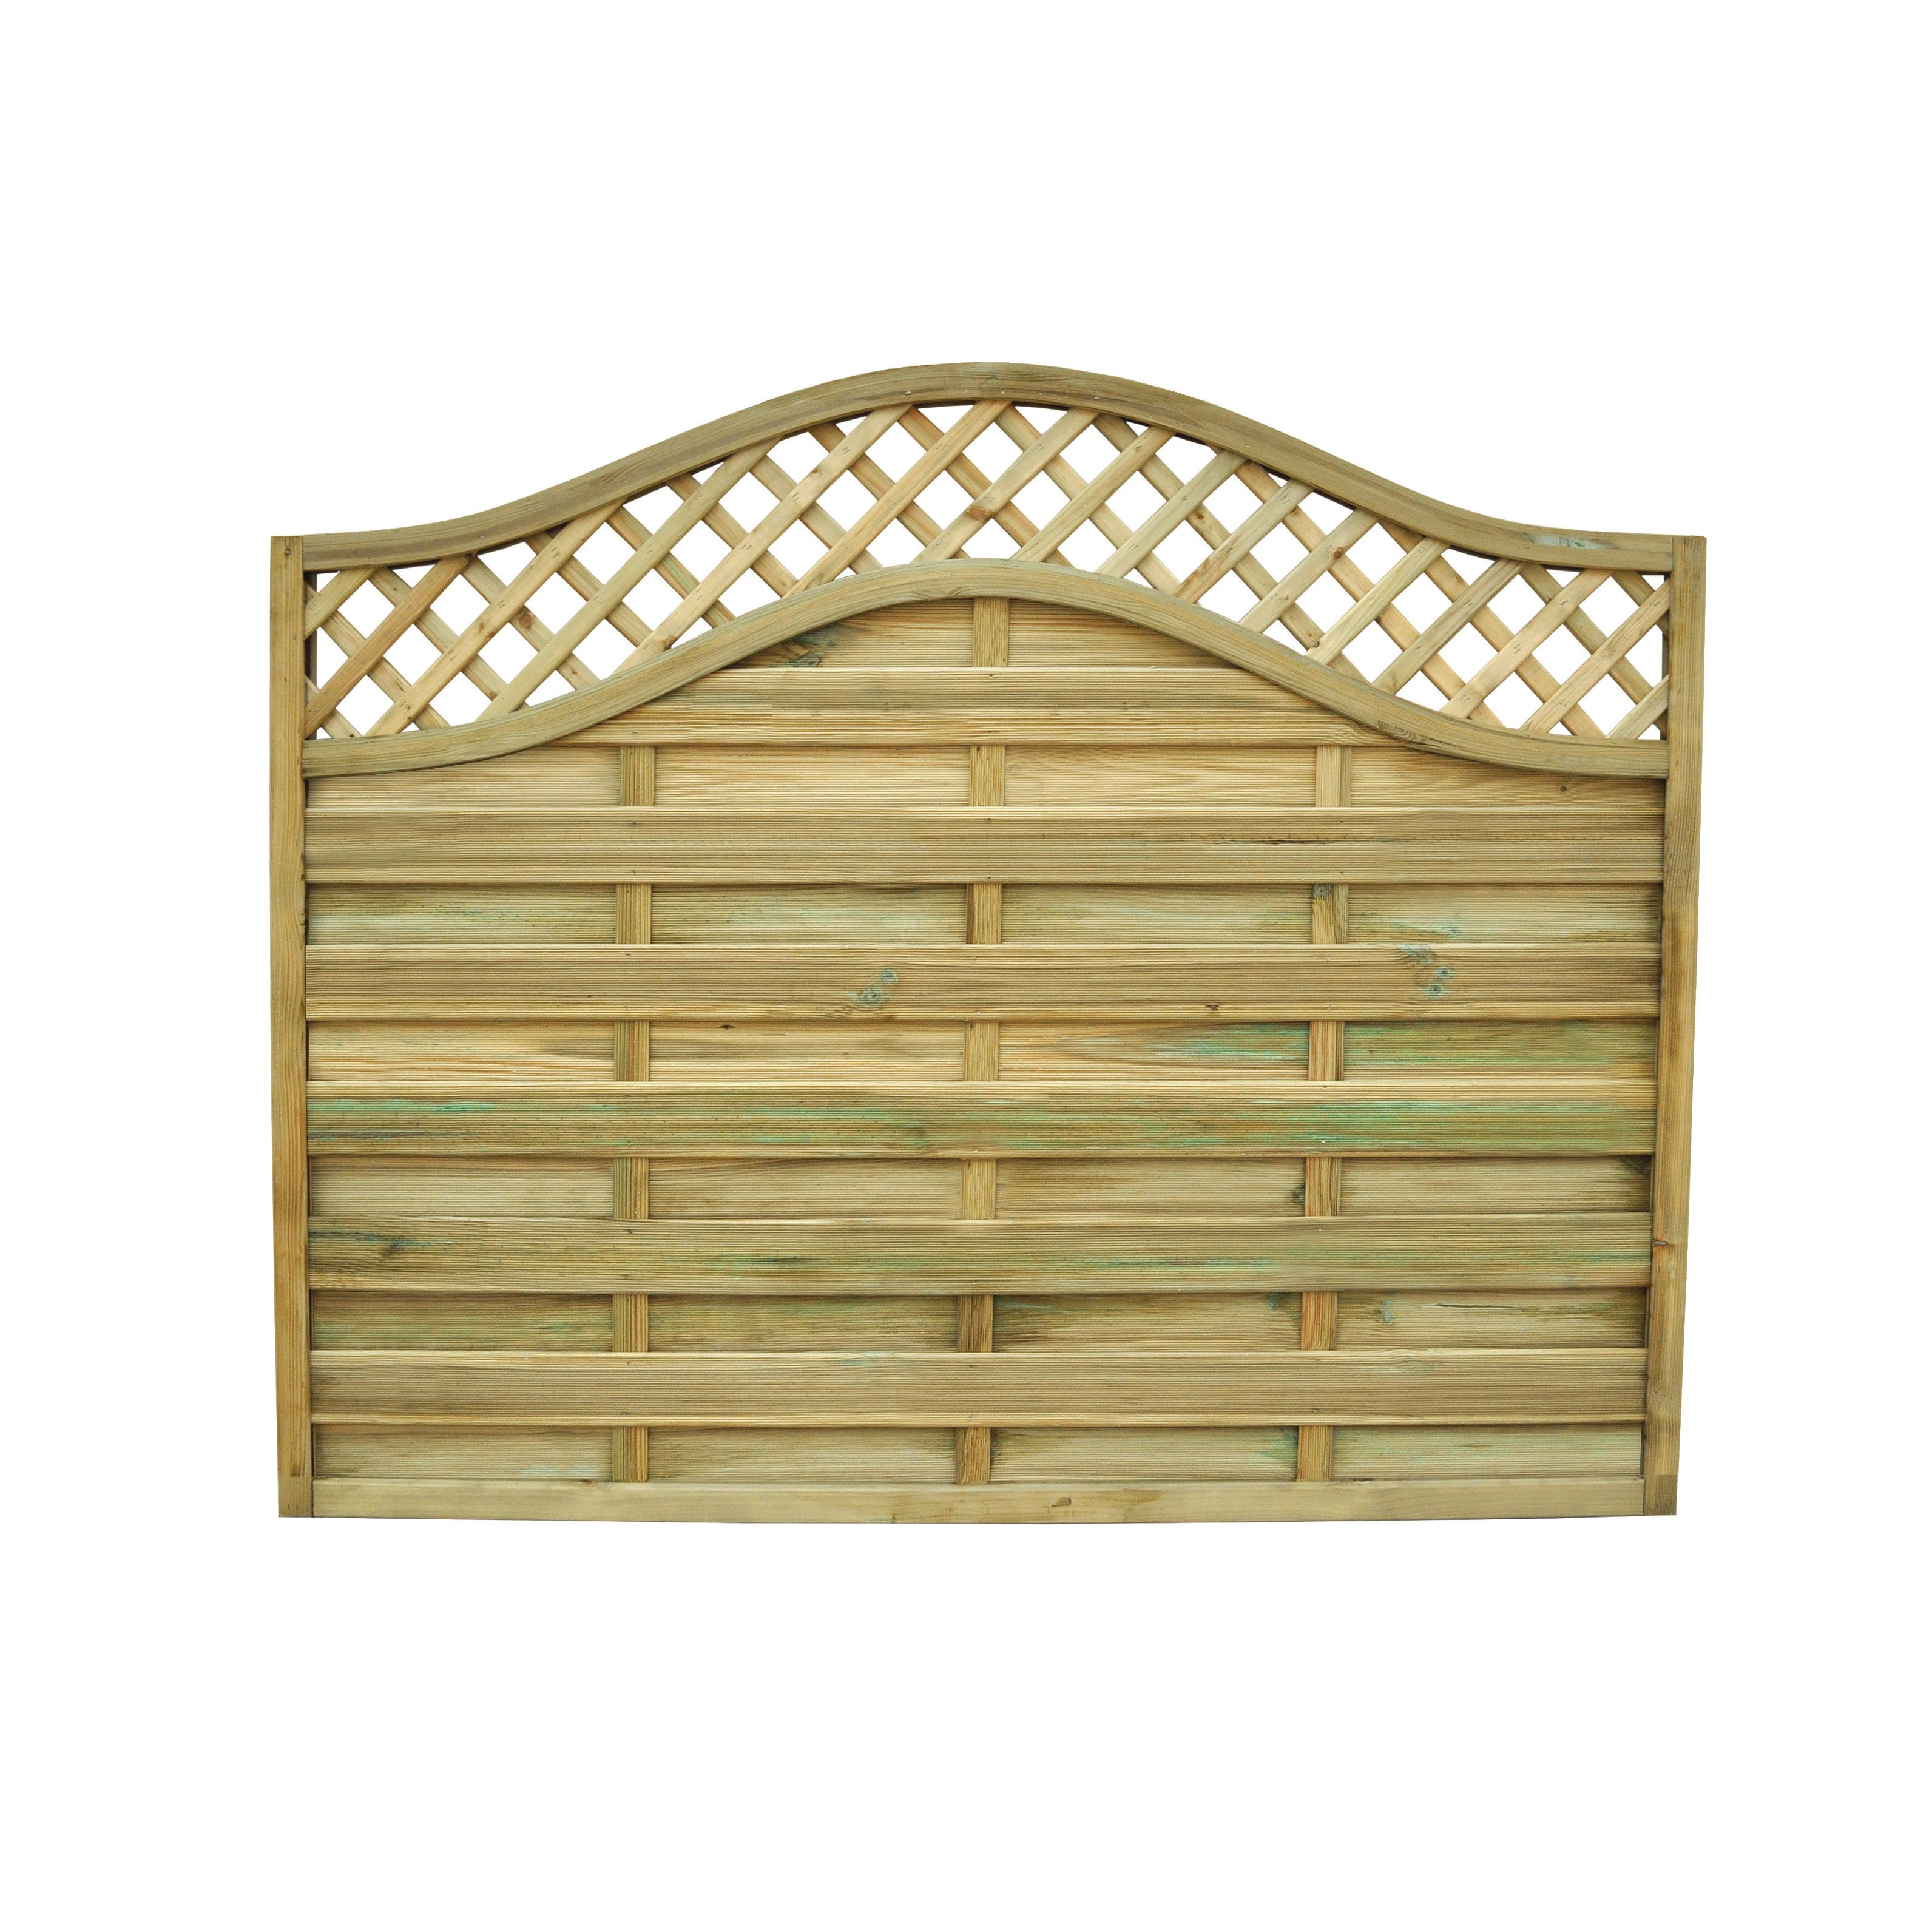 Image of Forest Garden Pressure Treated Bristol Fence Panel - 1800 x 1500mm - 6 x 5ft - Pack of 3